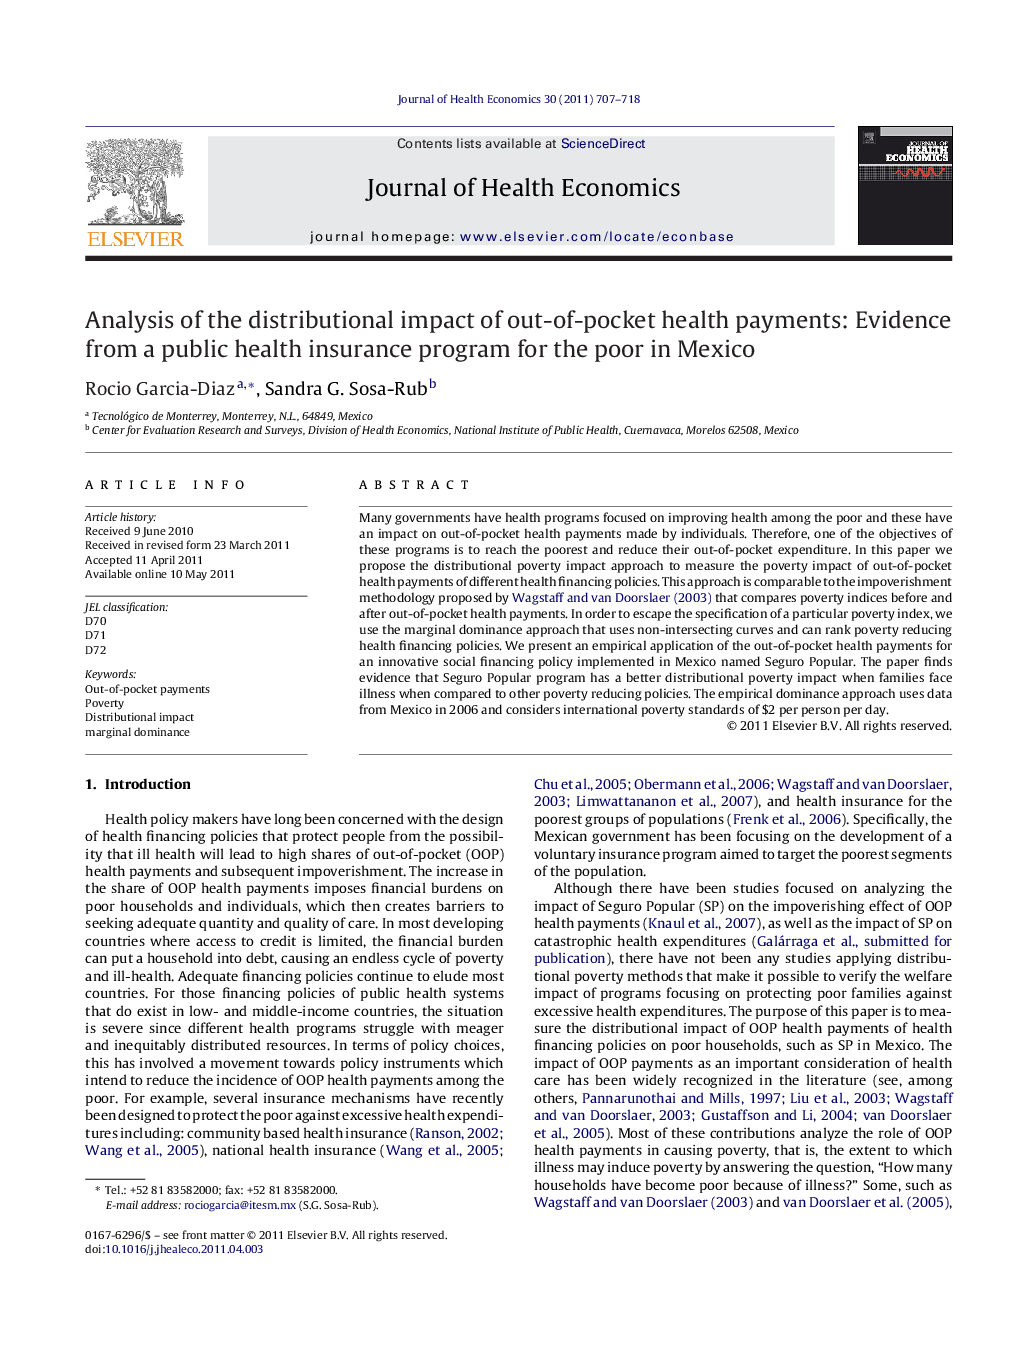 Analysis of the distributional impact of out-of-pocket health payments: Evidence from a public health insurance program for the poor in Mexico